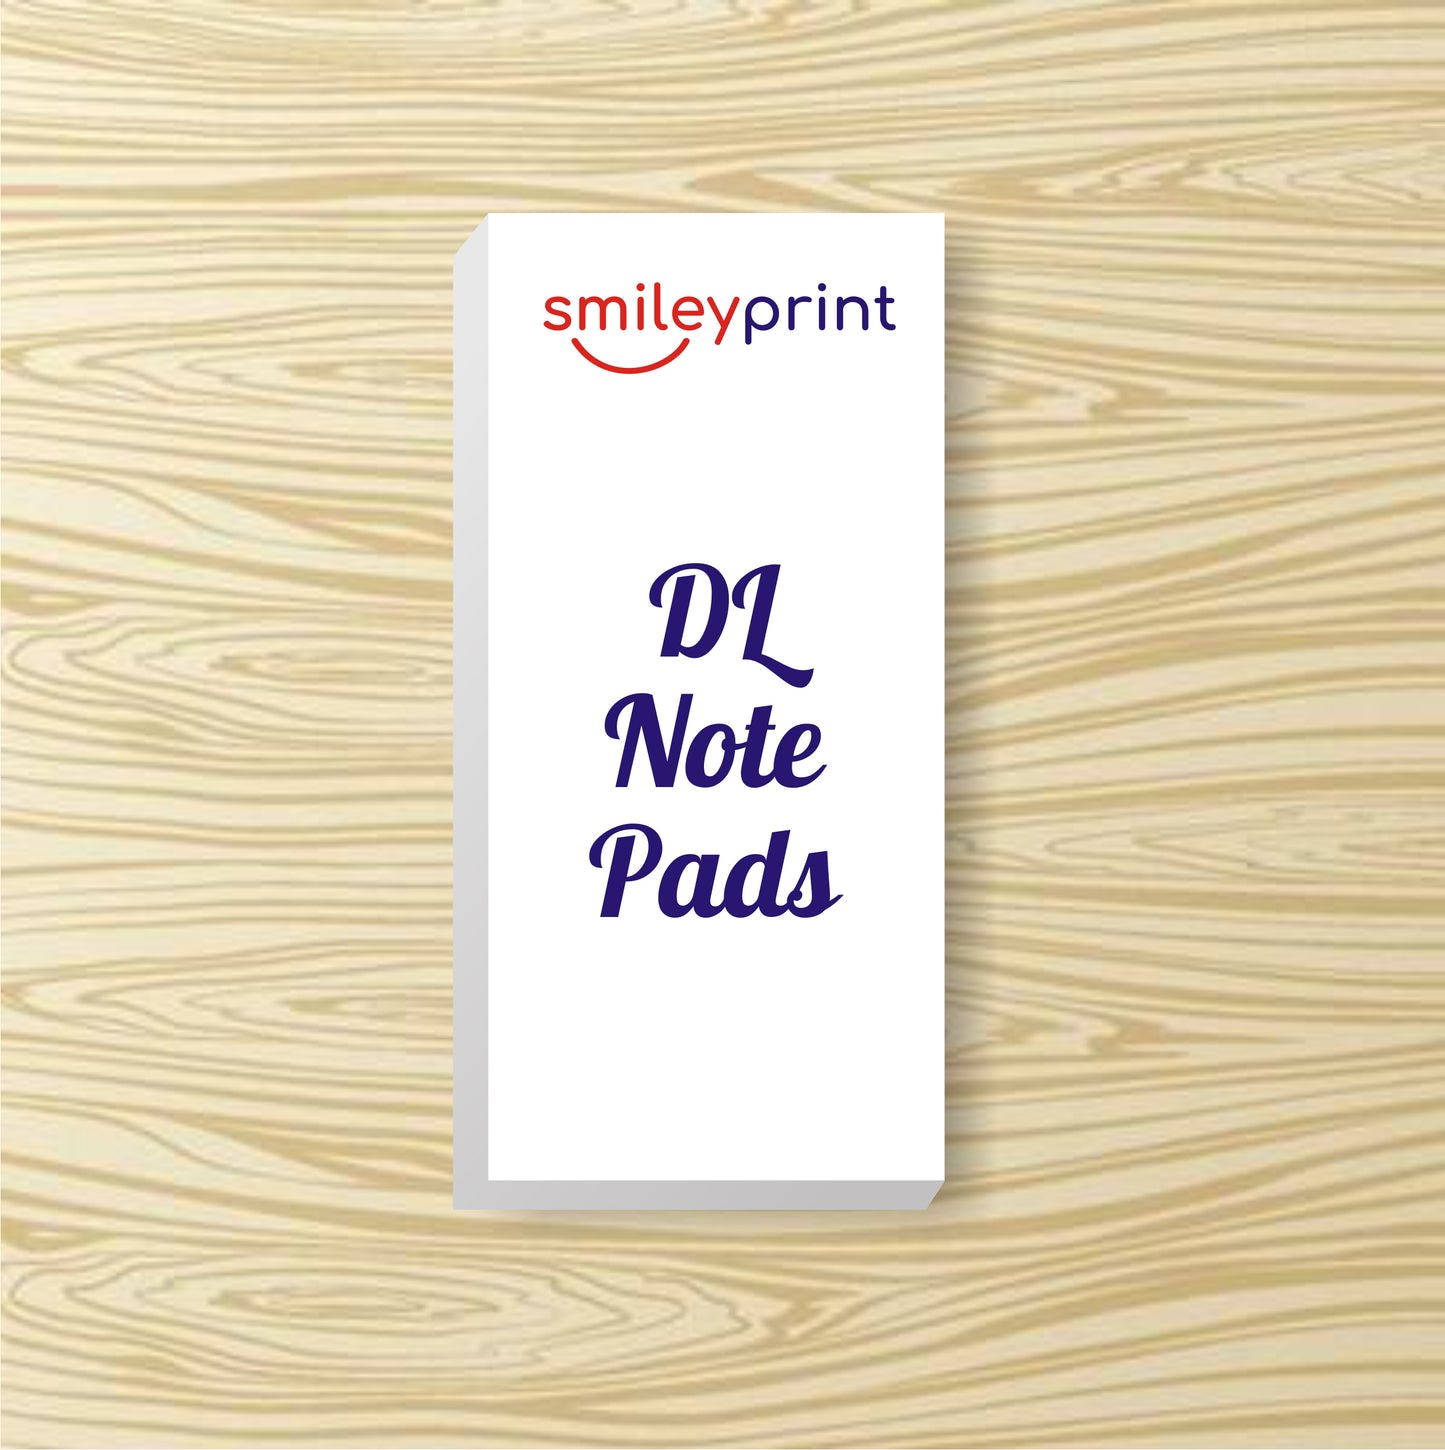 Note Pads | Smileyprint.co.uk